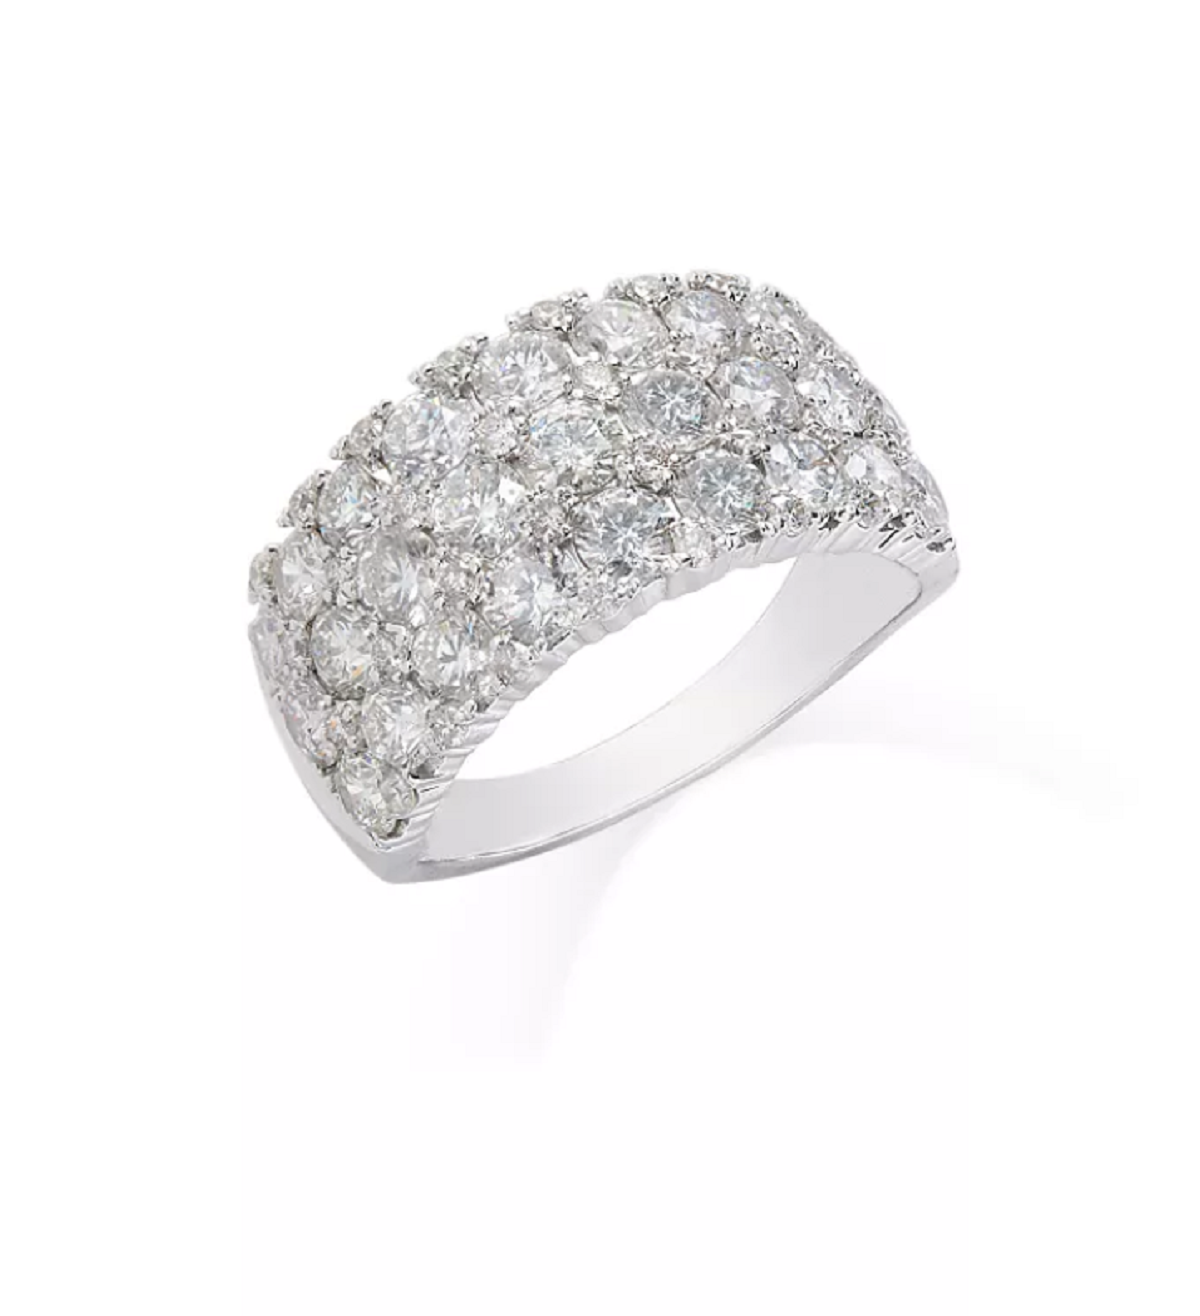 Diamond Multirow Ring in 14K White Gold, Expensive Gifts for Mom